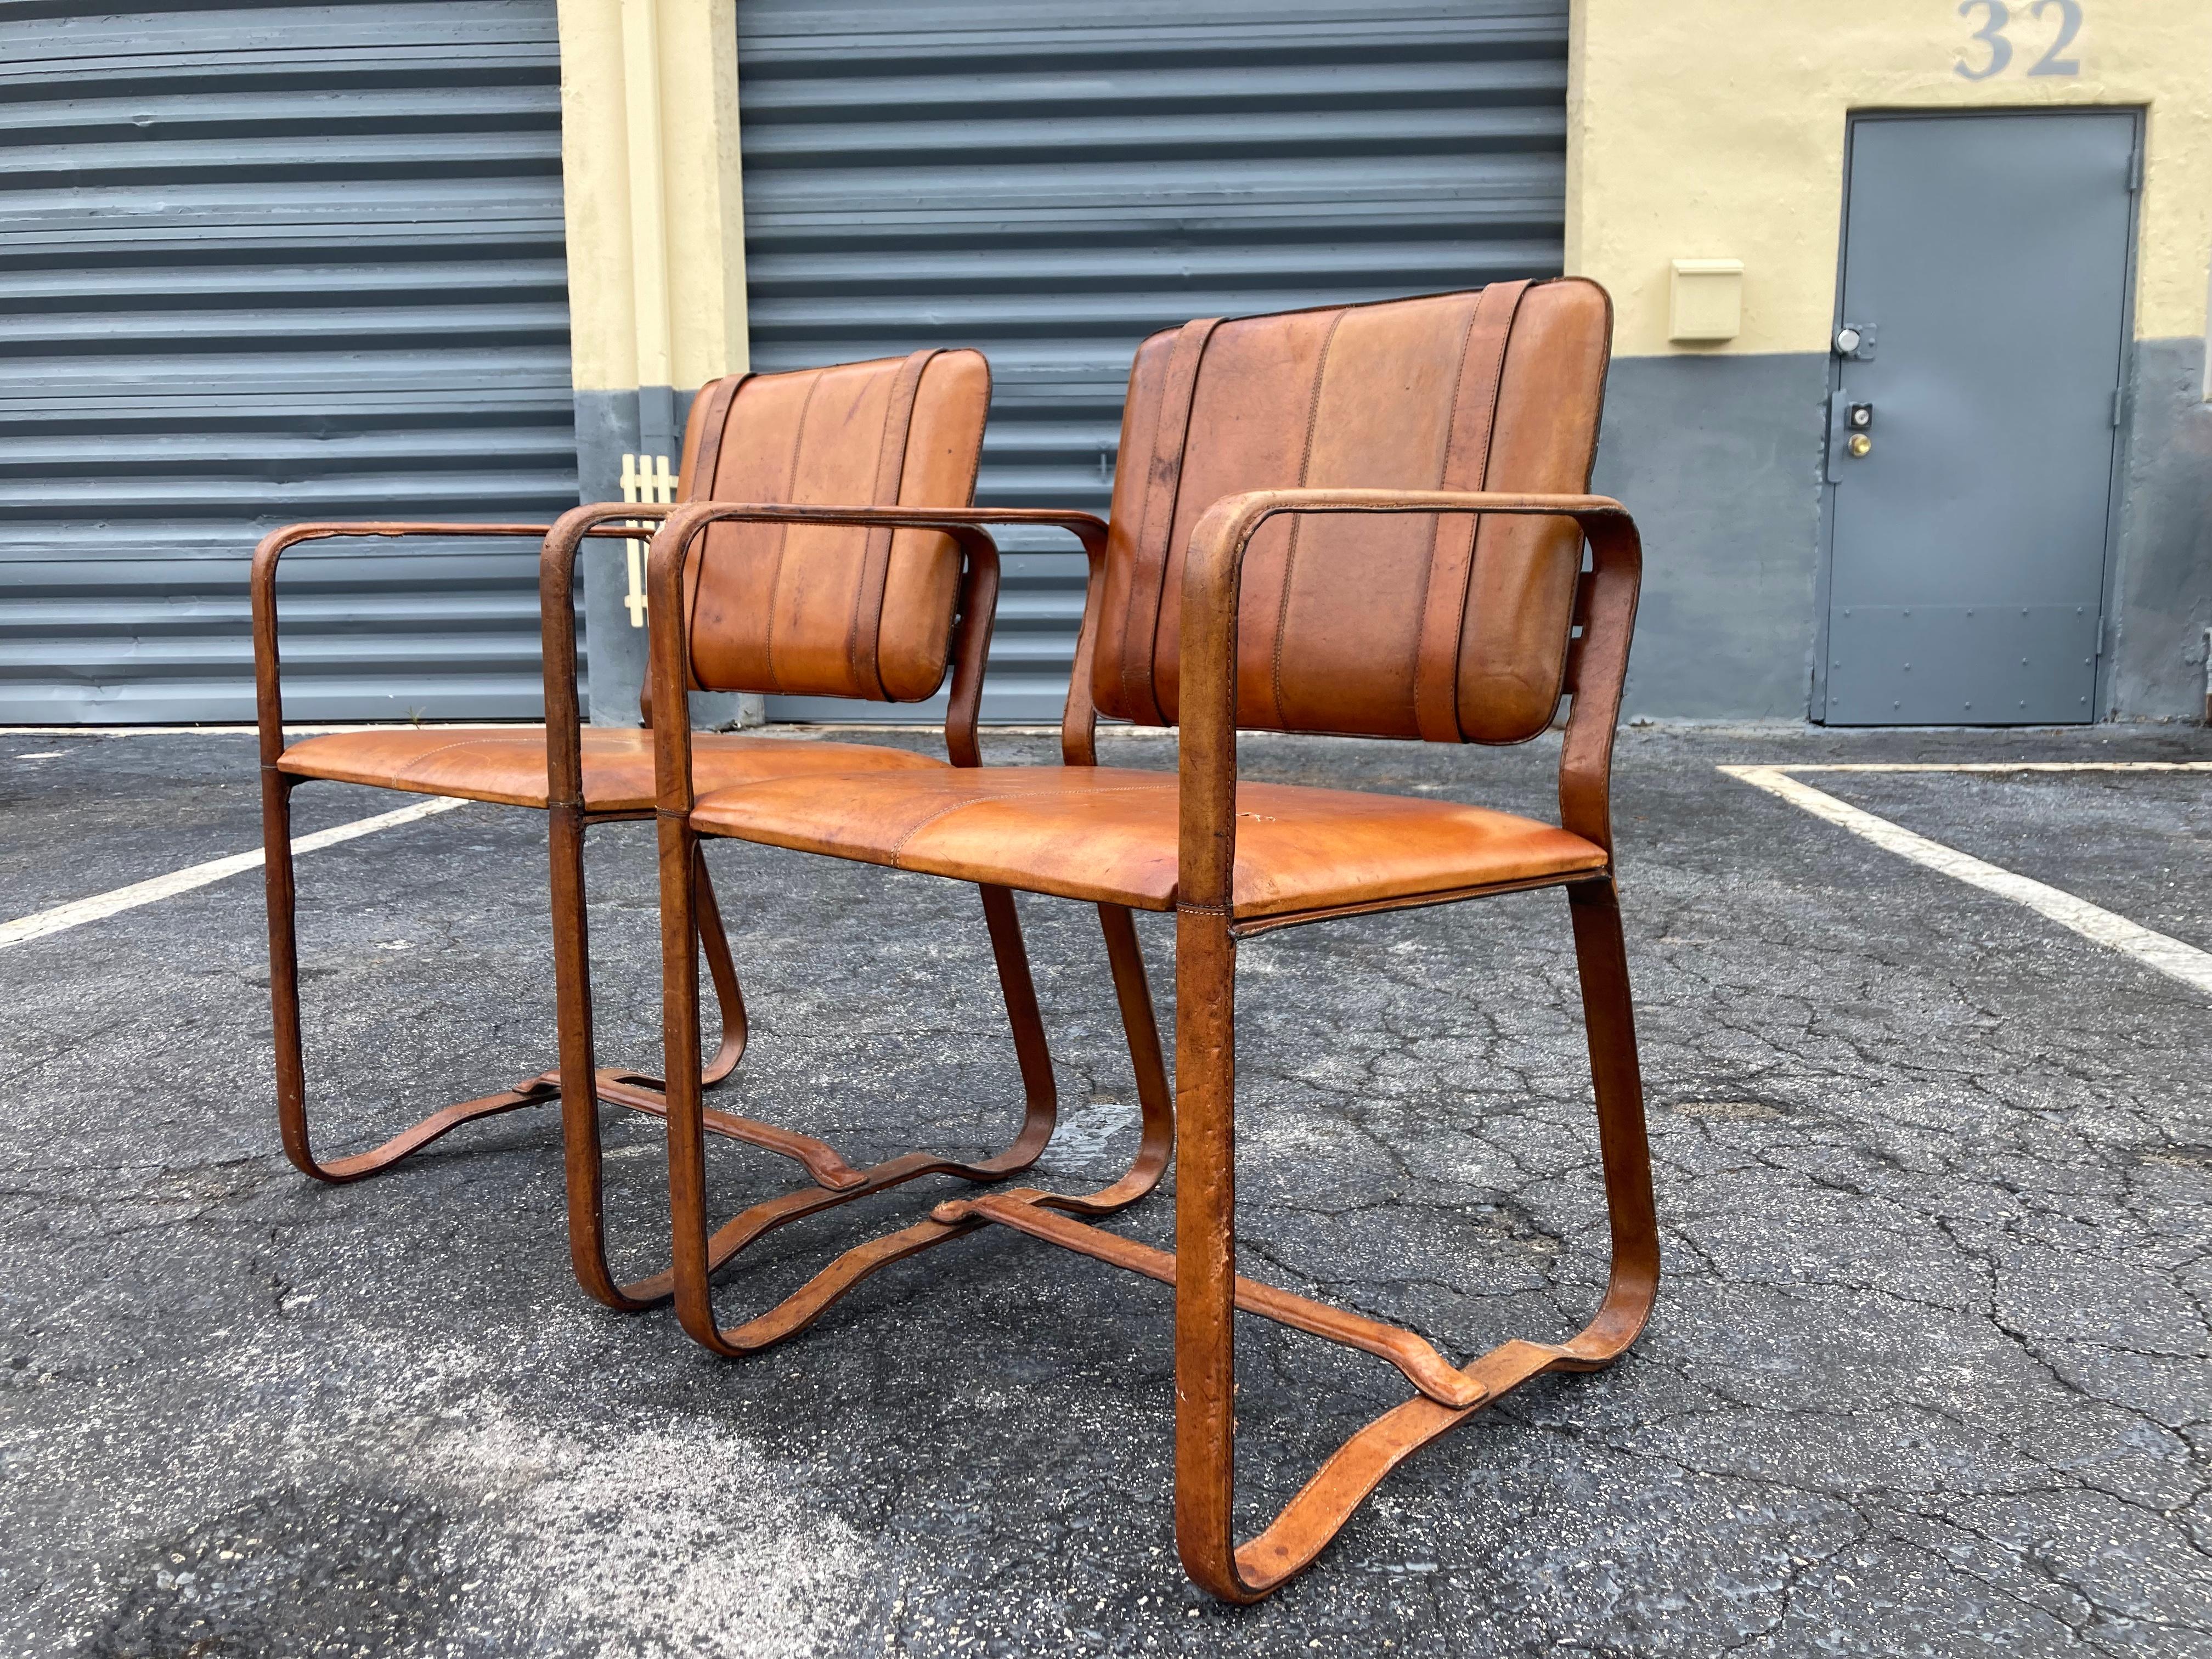 Late 20th Century Pair of Cognac Leather Wrapped Arm Chairs in the style of Jacques Adnet